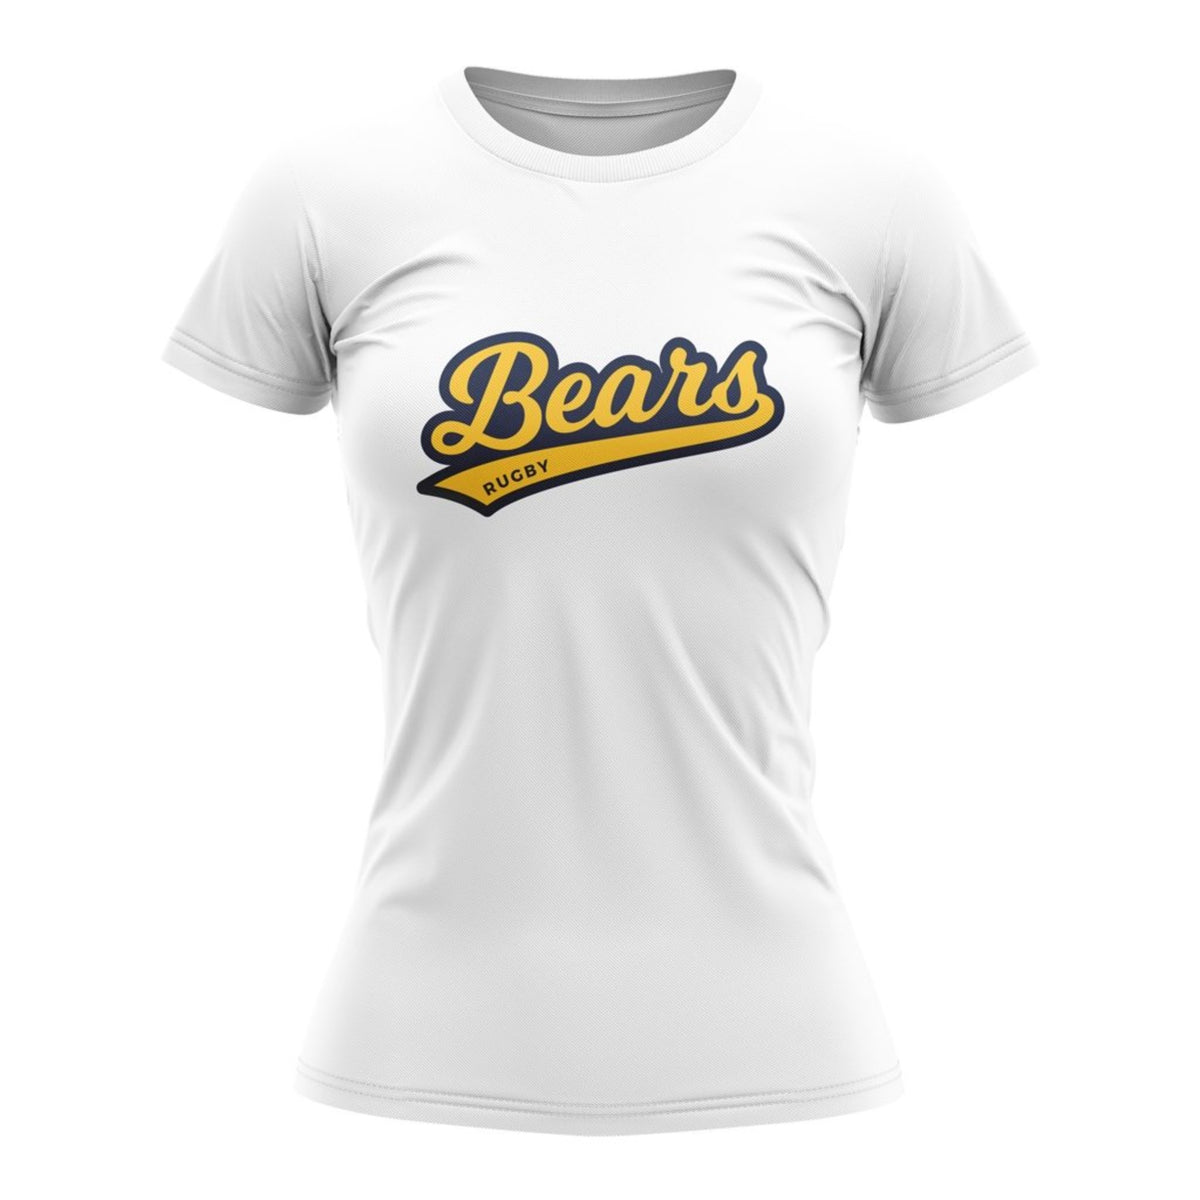 BC Rugby 2021 &quot;Bears&quot; Tee - Women&#39;s White/Gold - www.therugbyshop.com www.therugbyshop.com WOMENS / WHITE / XS XIX Brands TEES BC Rugby 2021 &quot;Bears&quot; Tee - Women&#39;s White/Gold